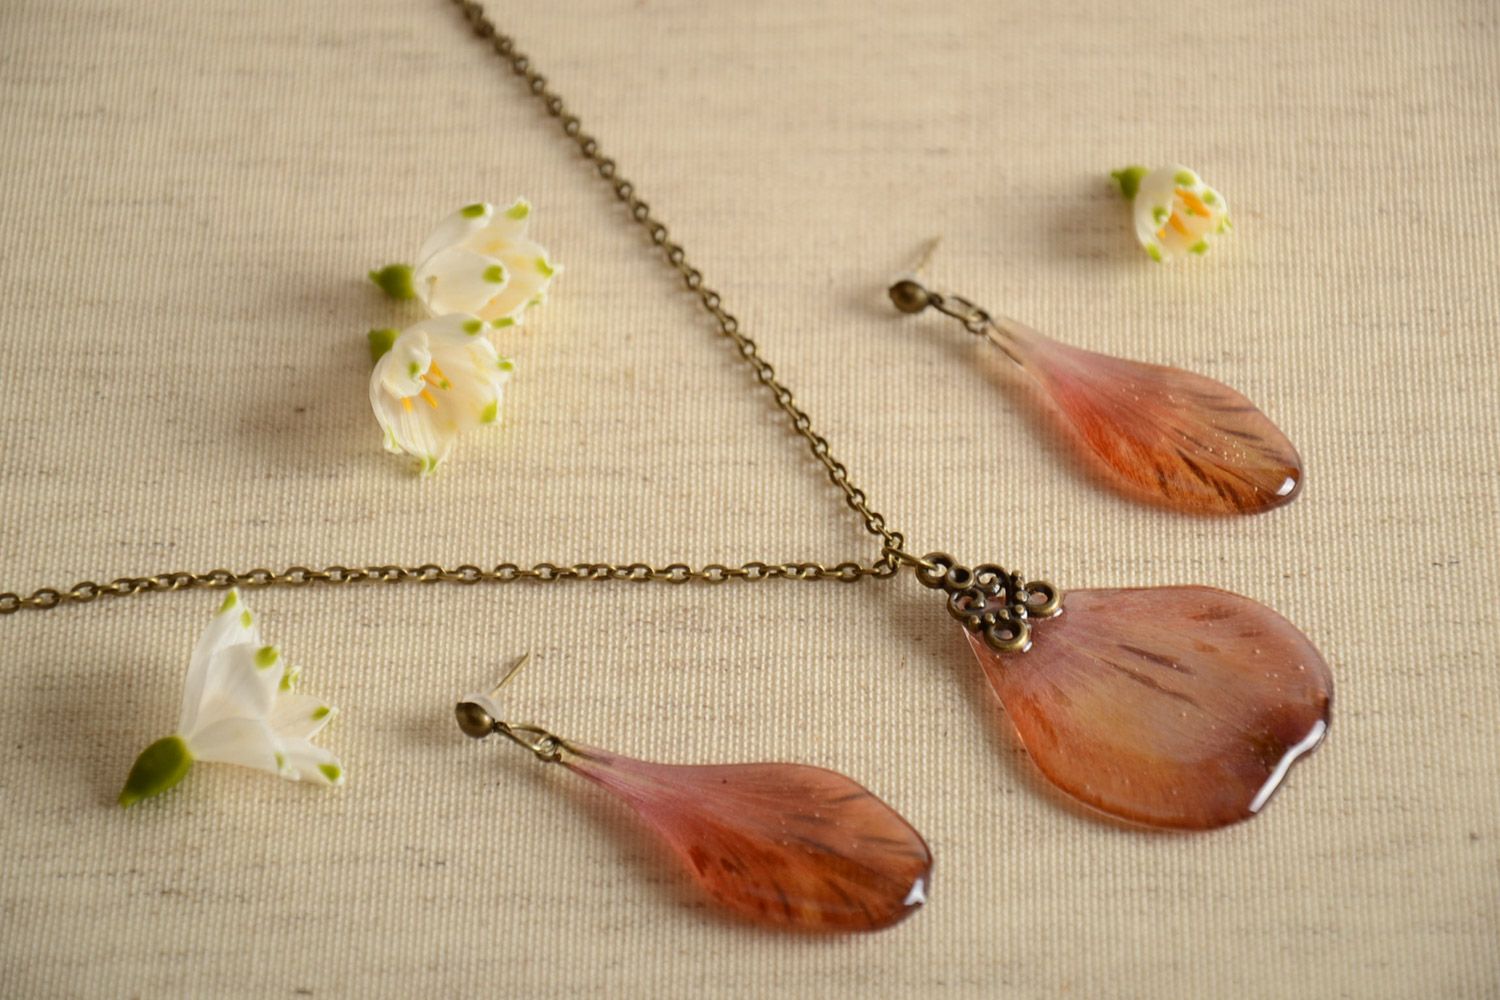 Handmade jewelry set with real flowers coated with epoxy 2 items botanical earrings and pendant photo 1